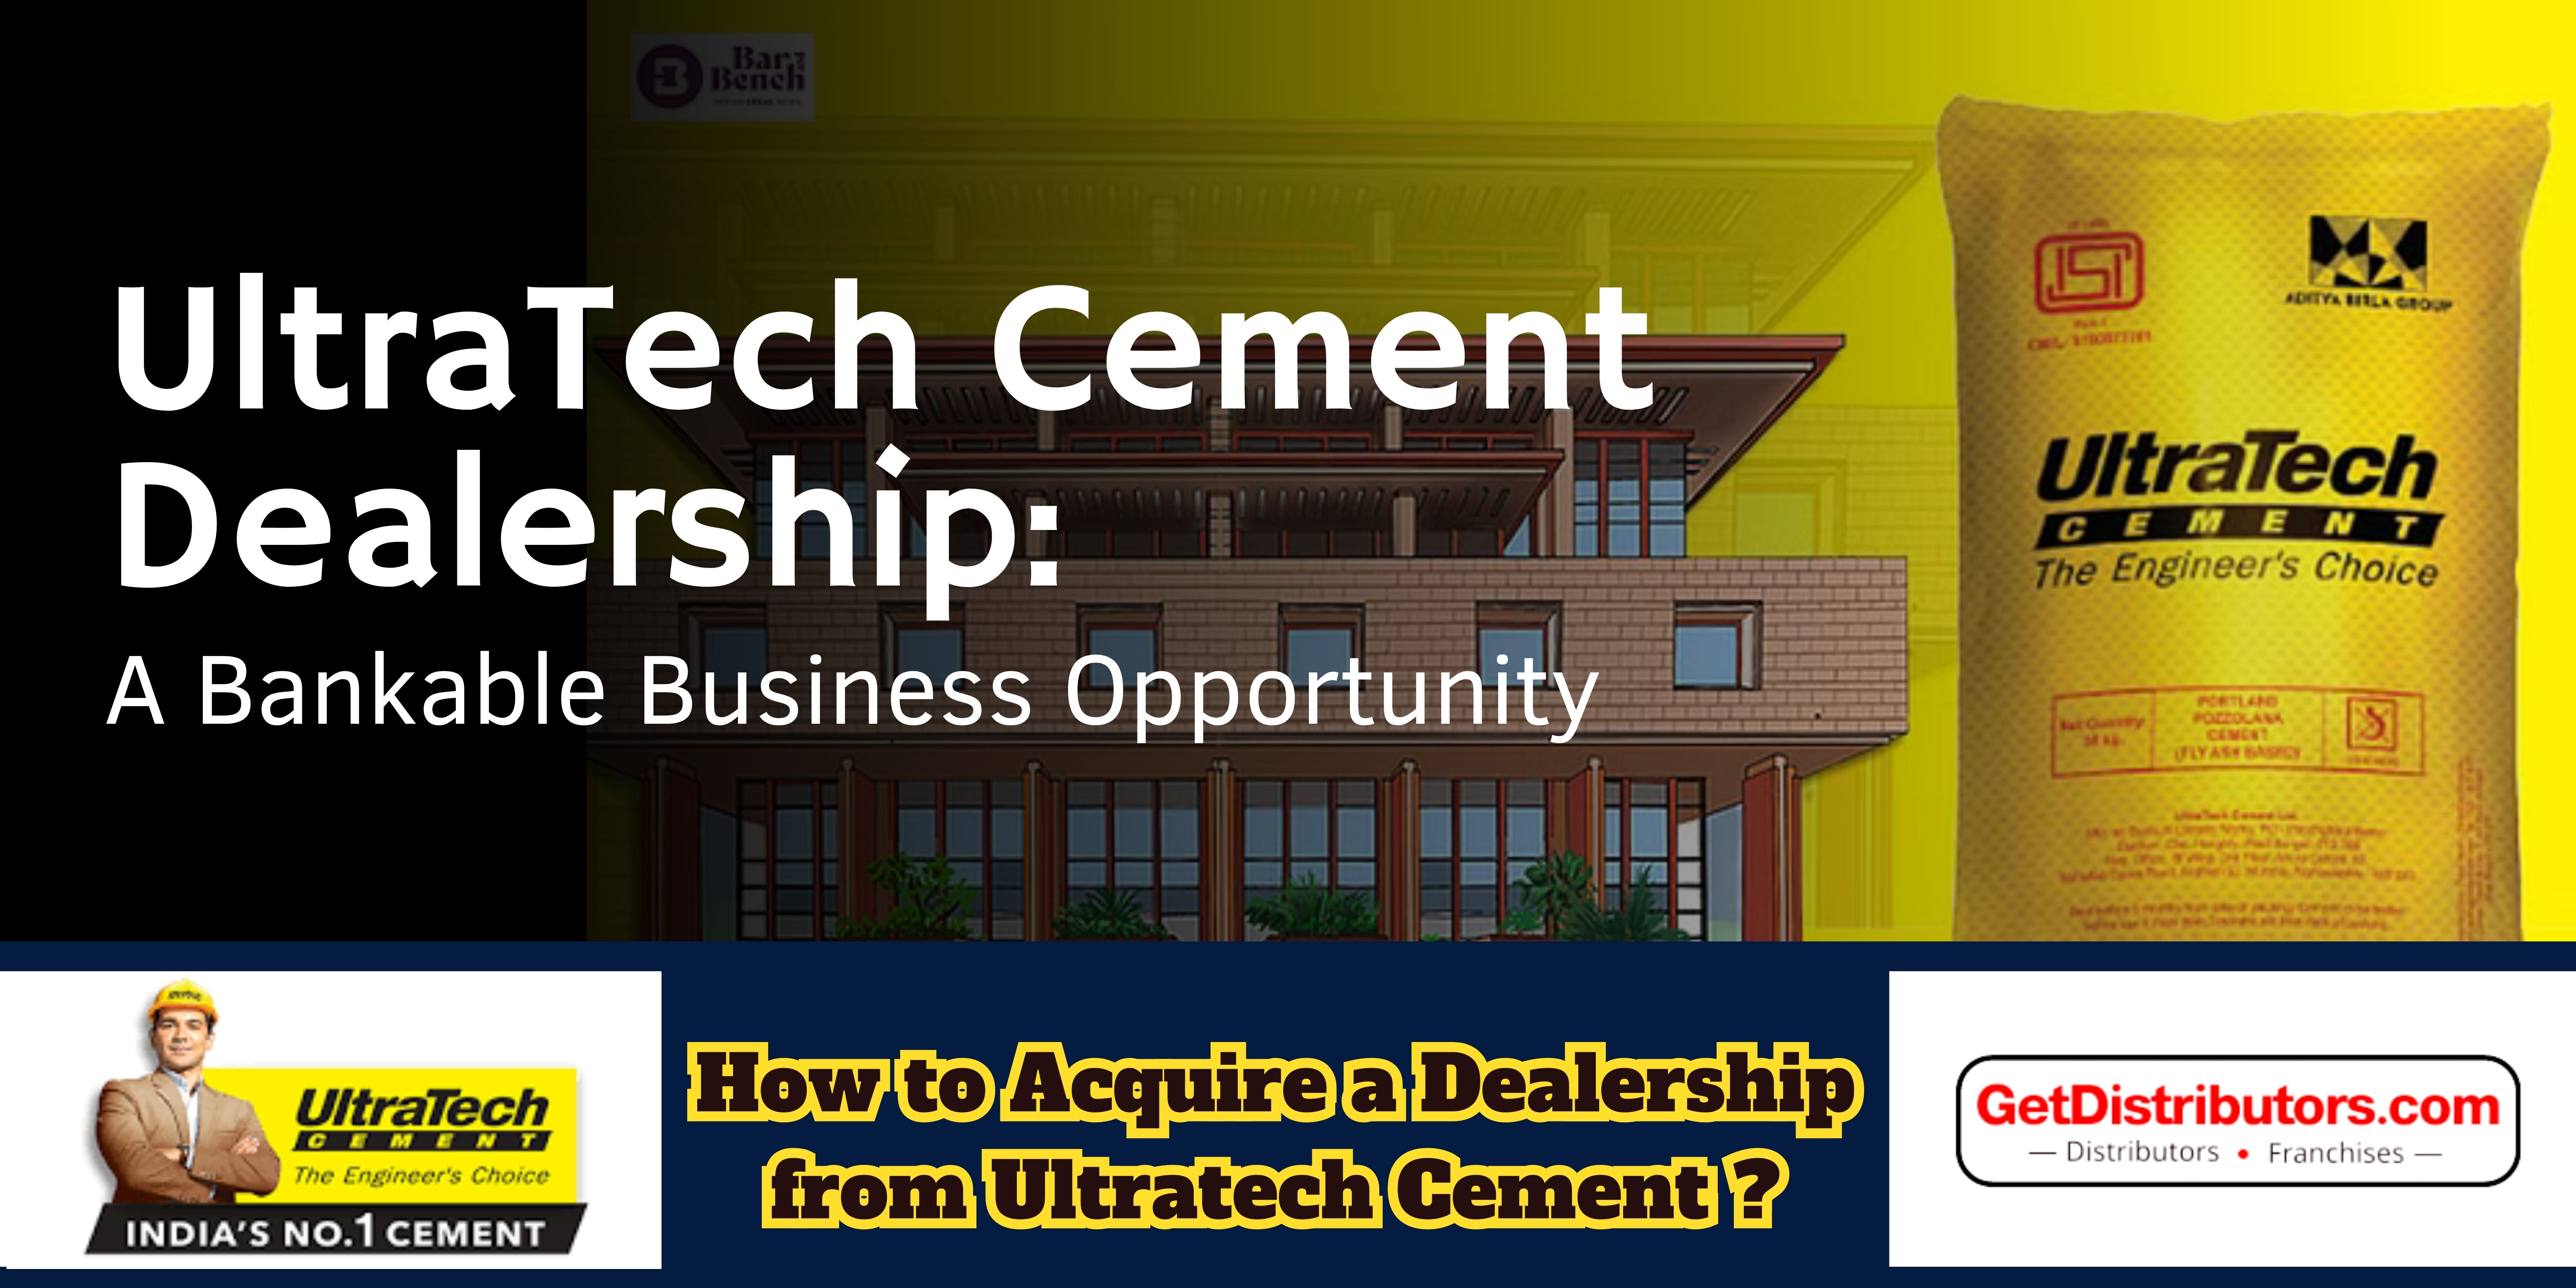 How to Get UltraTech Cement Dealership: A Bankable Business Opportunity